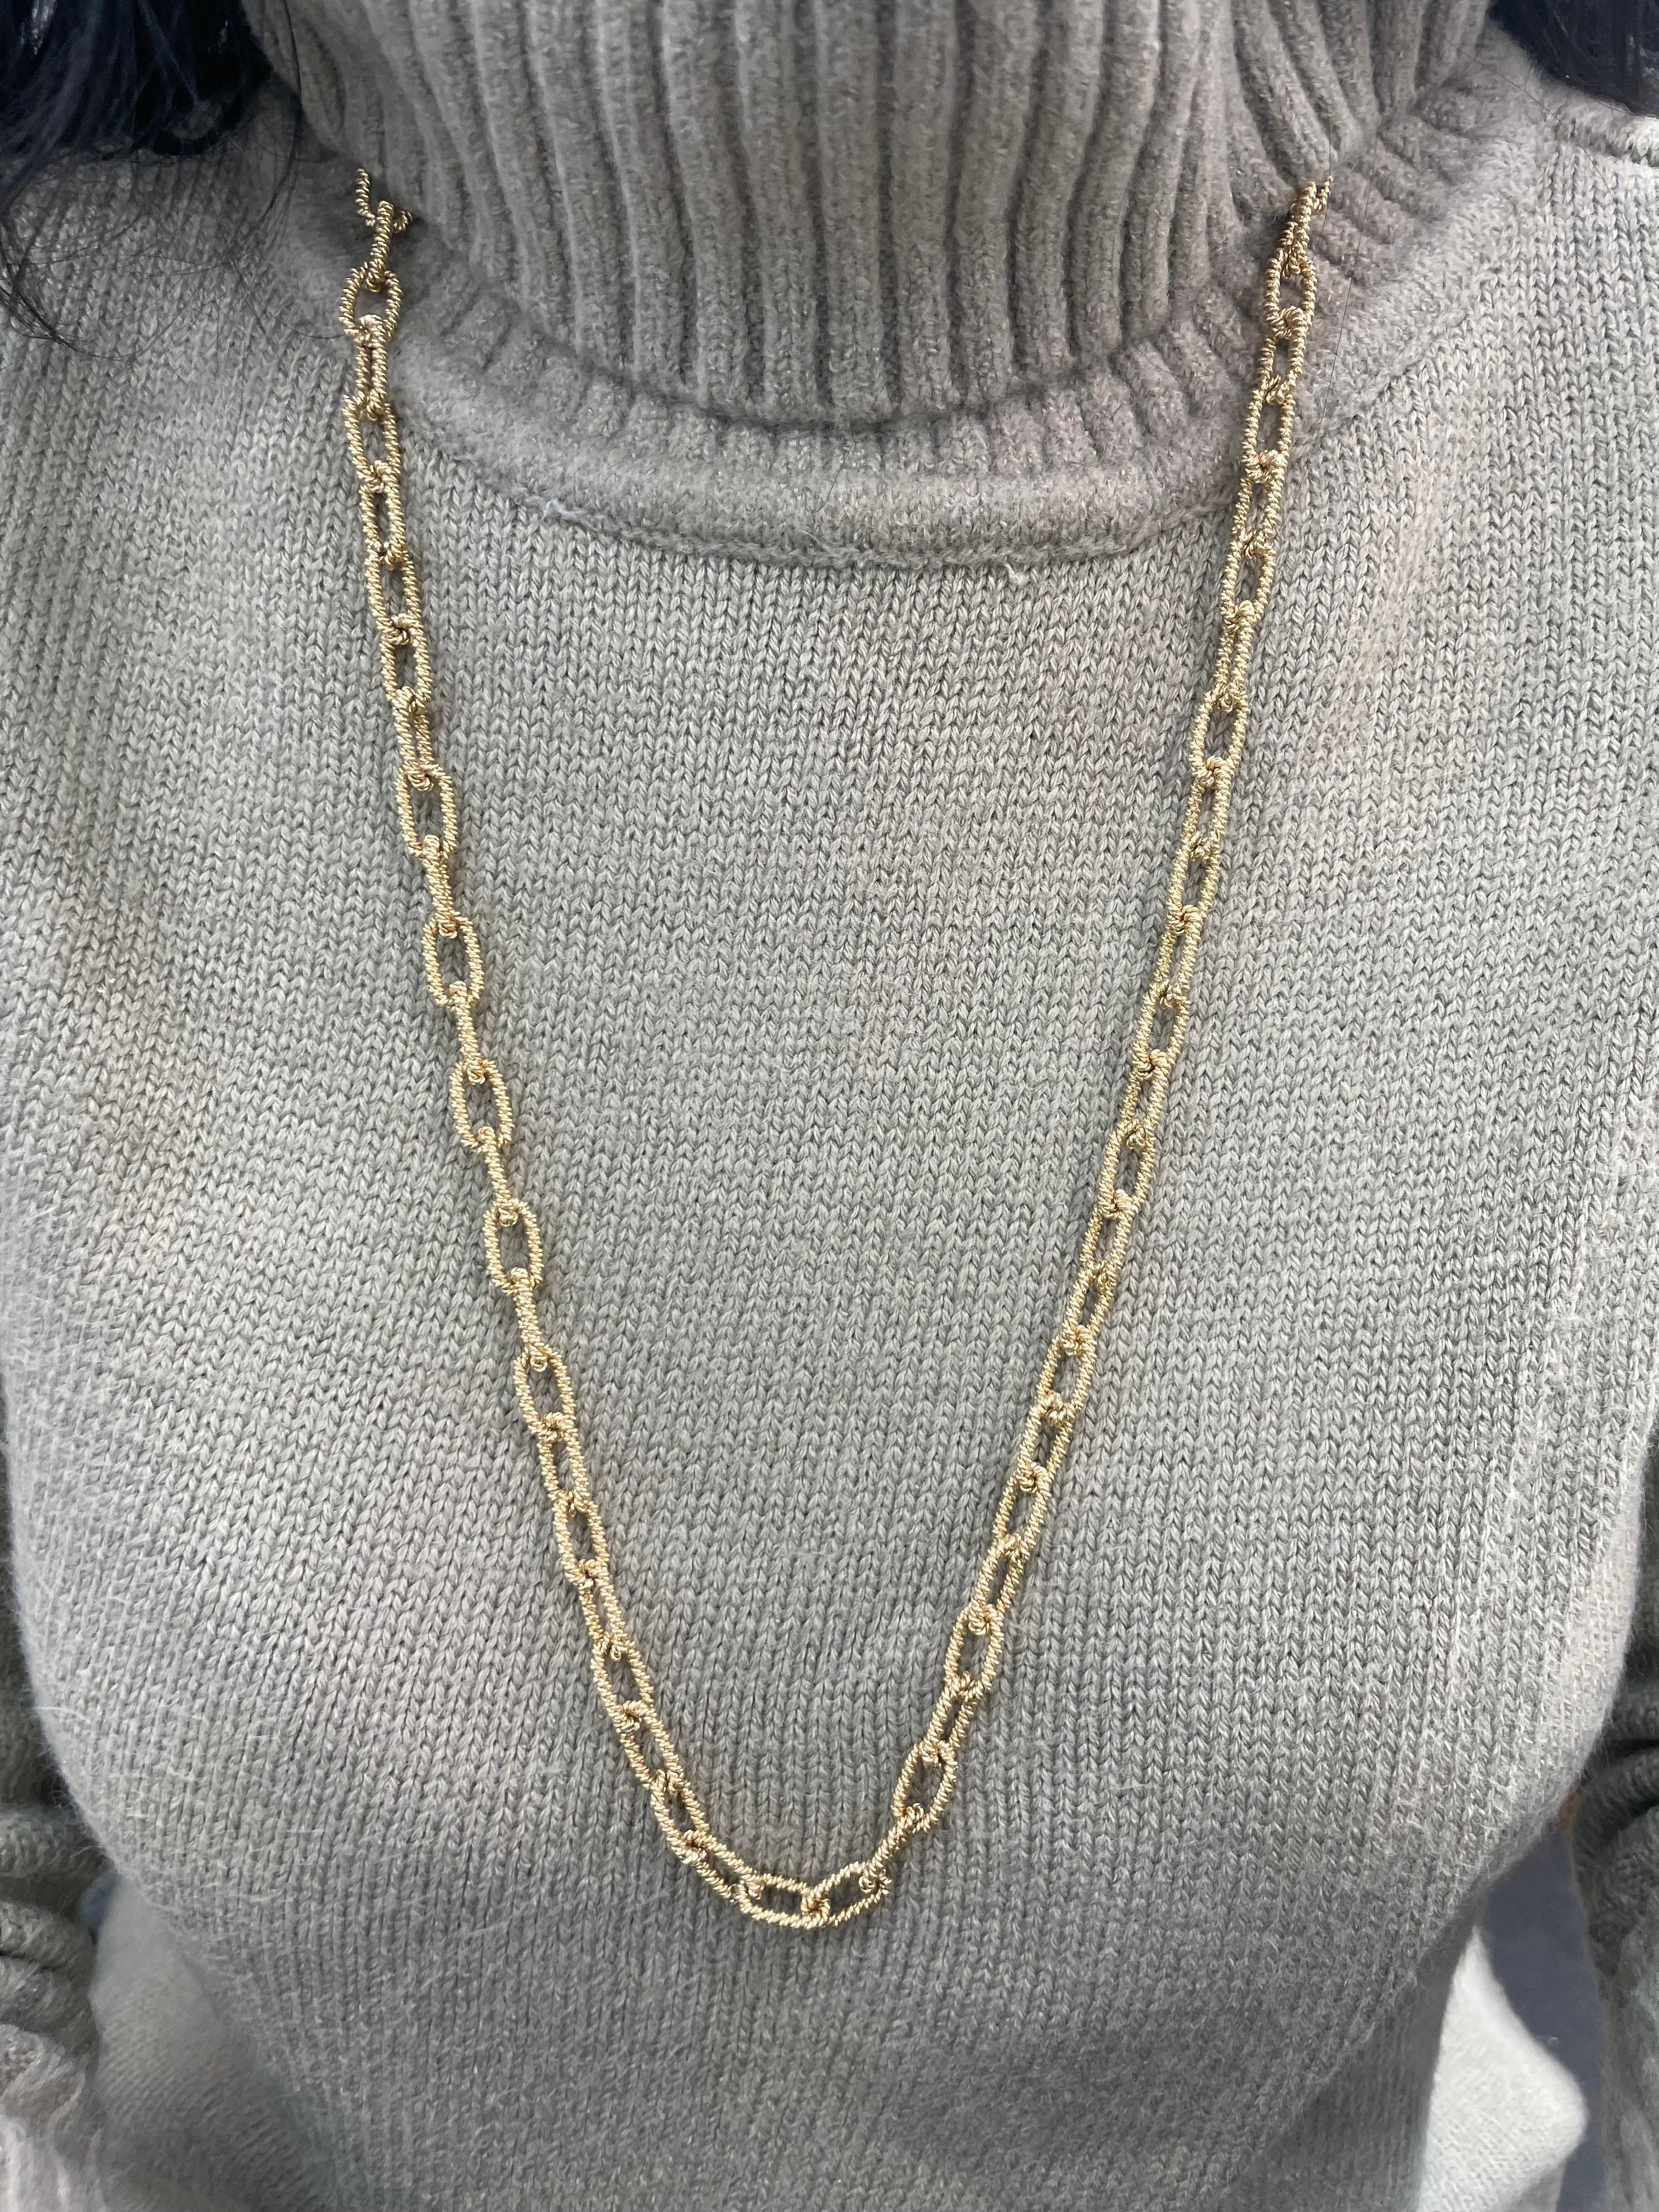 14 Karat Yellow Gold Heavy Rope Link Chain Necklace 84.5 Grams For Sale 7